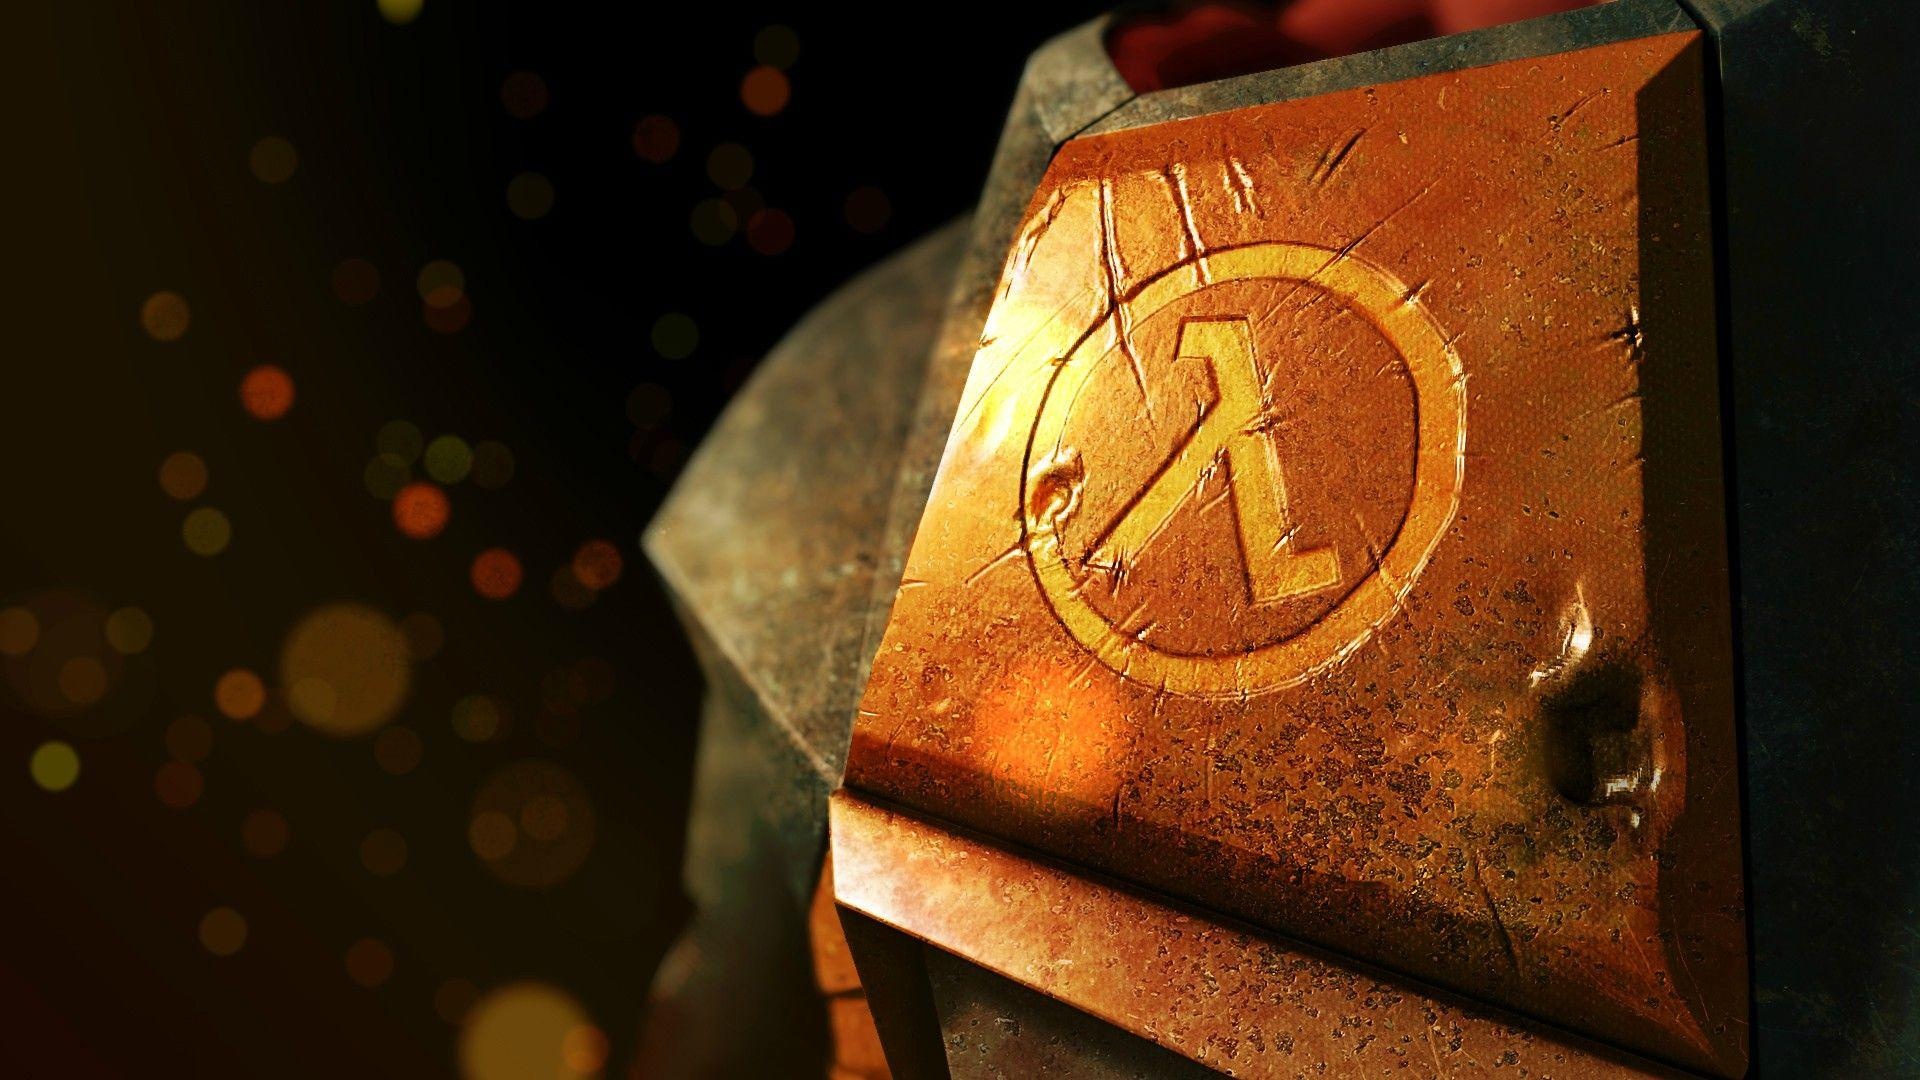 Half-Life, Varied wallpapers, Game franchise, collection, 1920x1080 Full HD Desktop